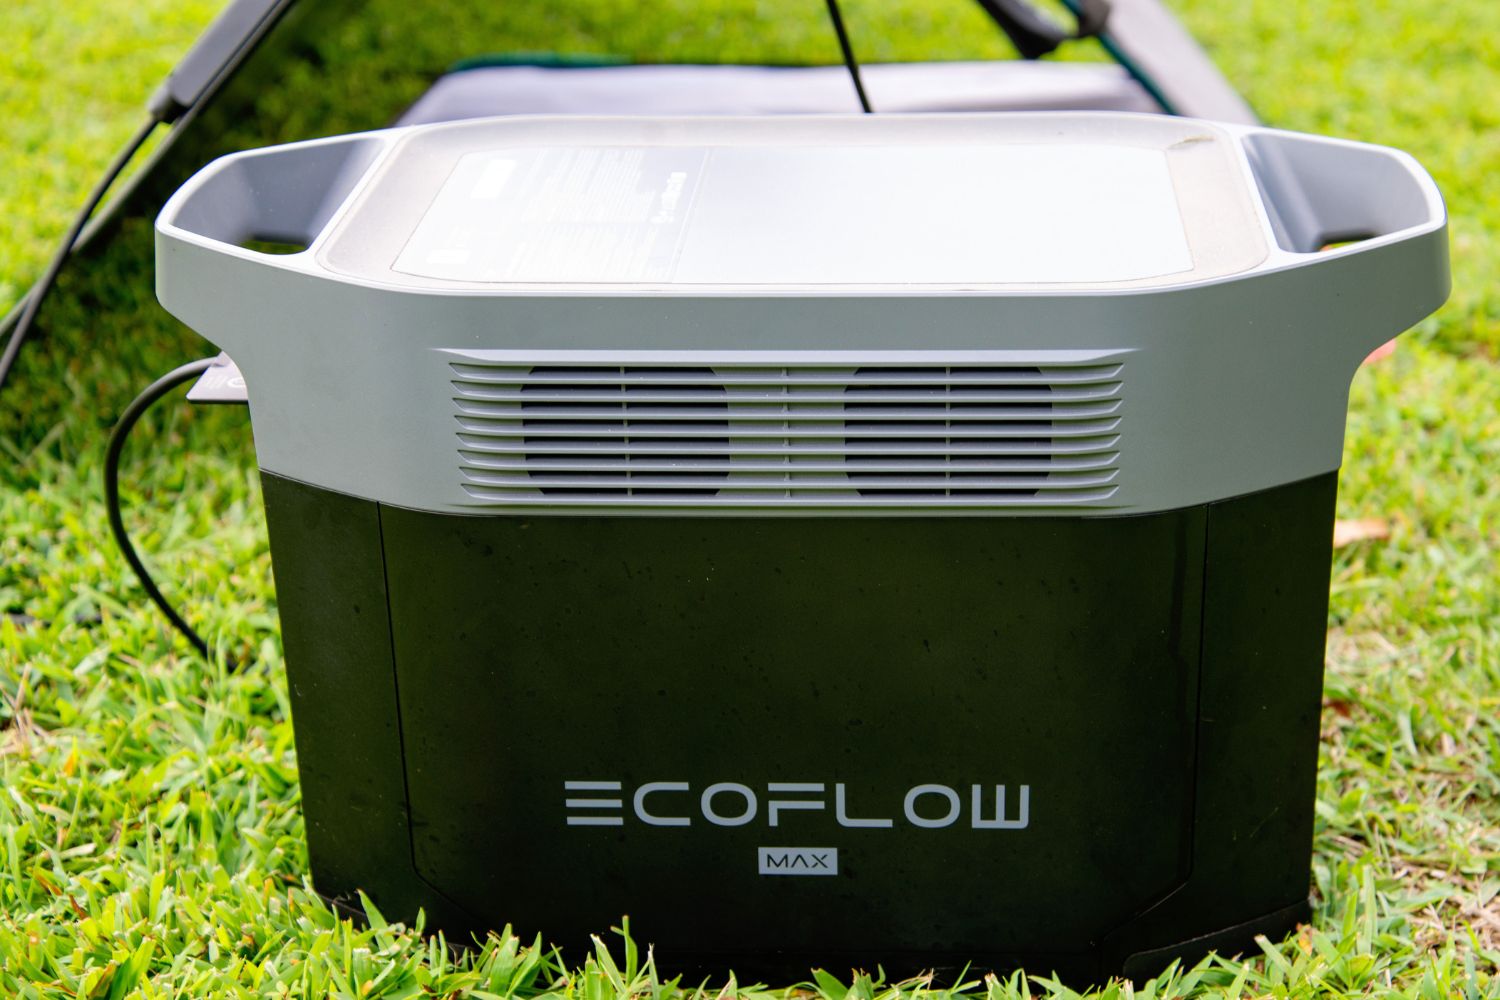 The EcoFlow Delta 2 Max solar generator next to its solar panel in a yard